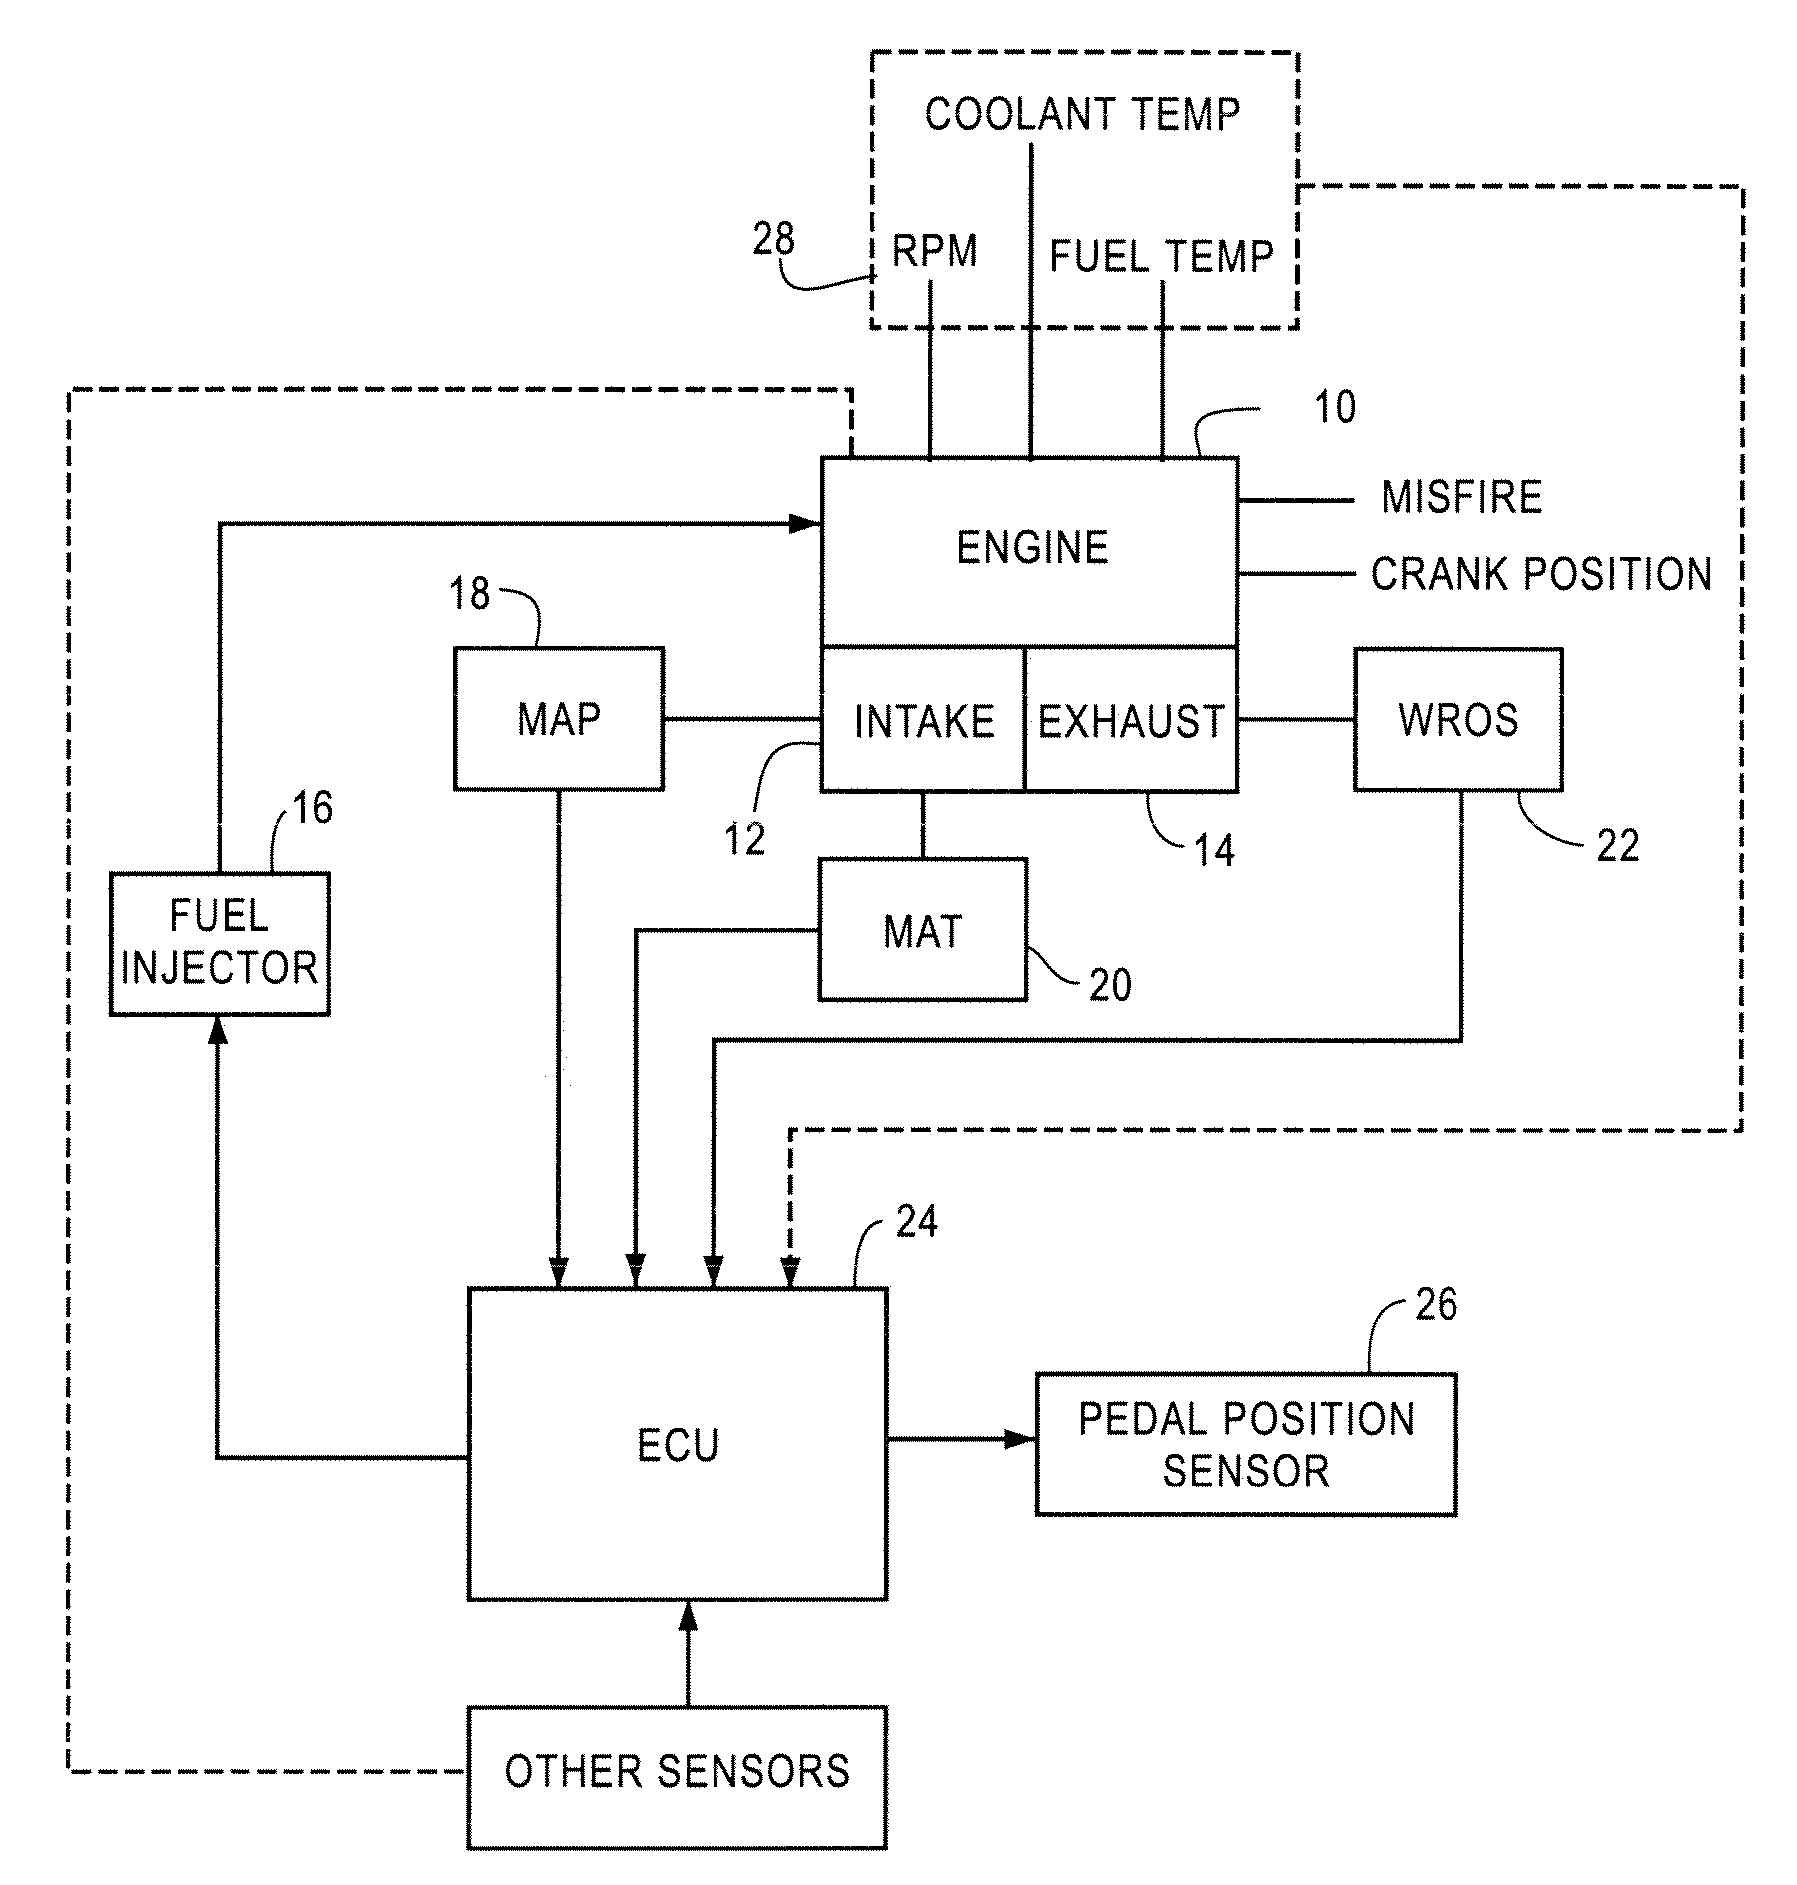 Method and apparatus for controlling an engine capable of operating on more than one type of fuel